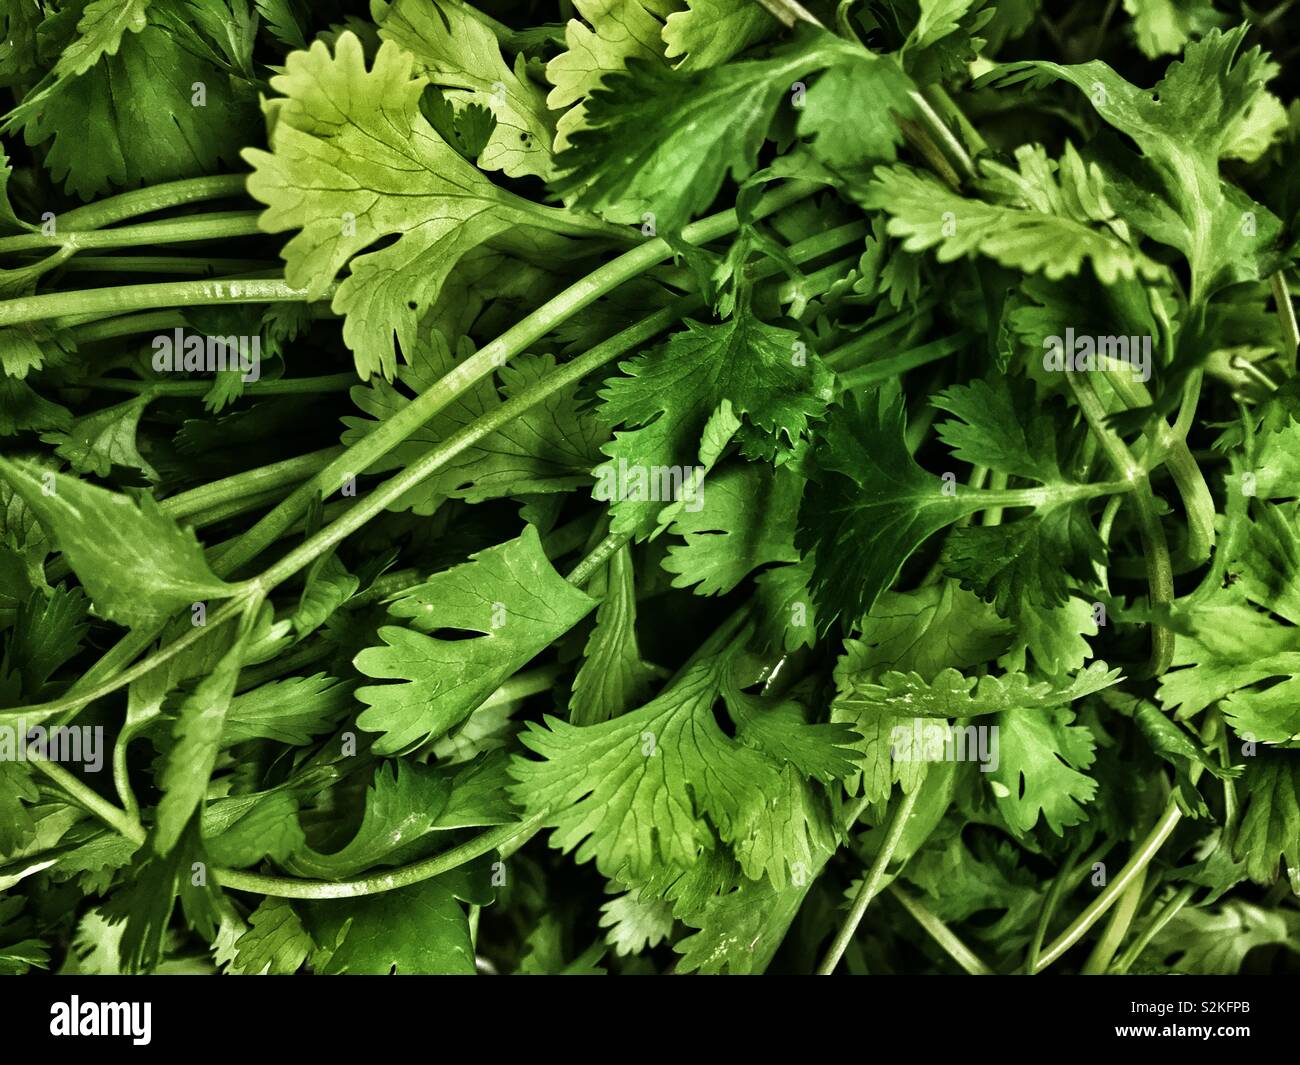 Full frame closeup of farm fresh delicious tasty crisp green cilantro leaves on display and for sale at the local produce market. Stock Photo